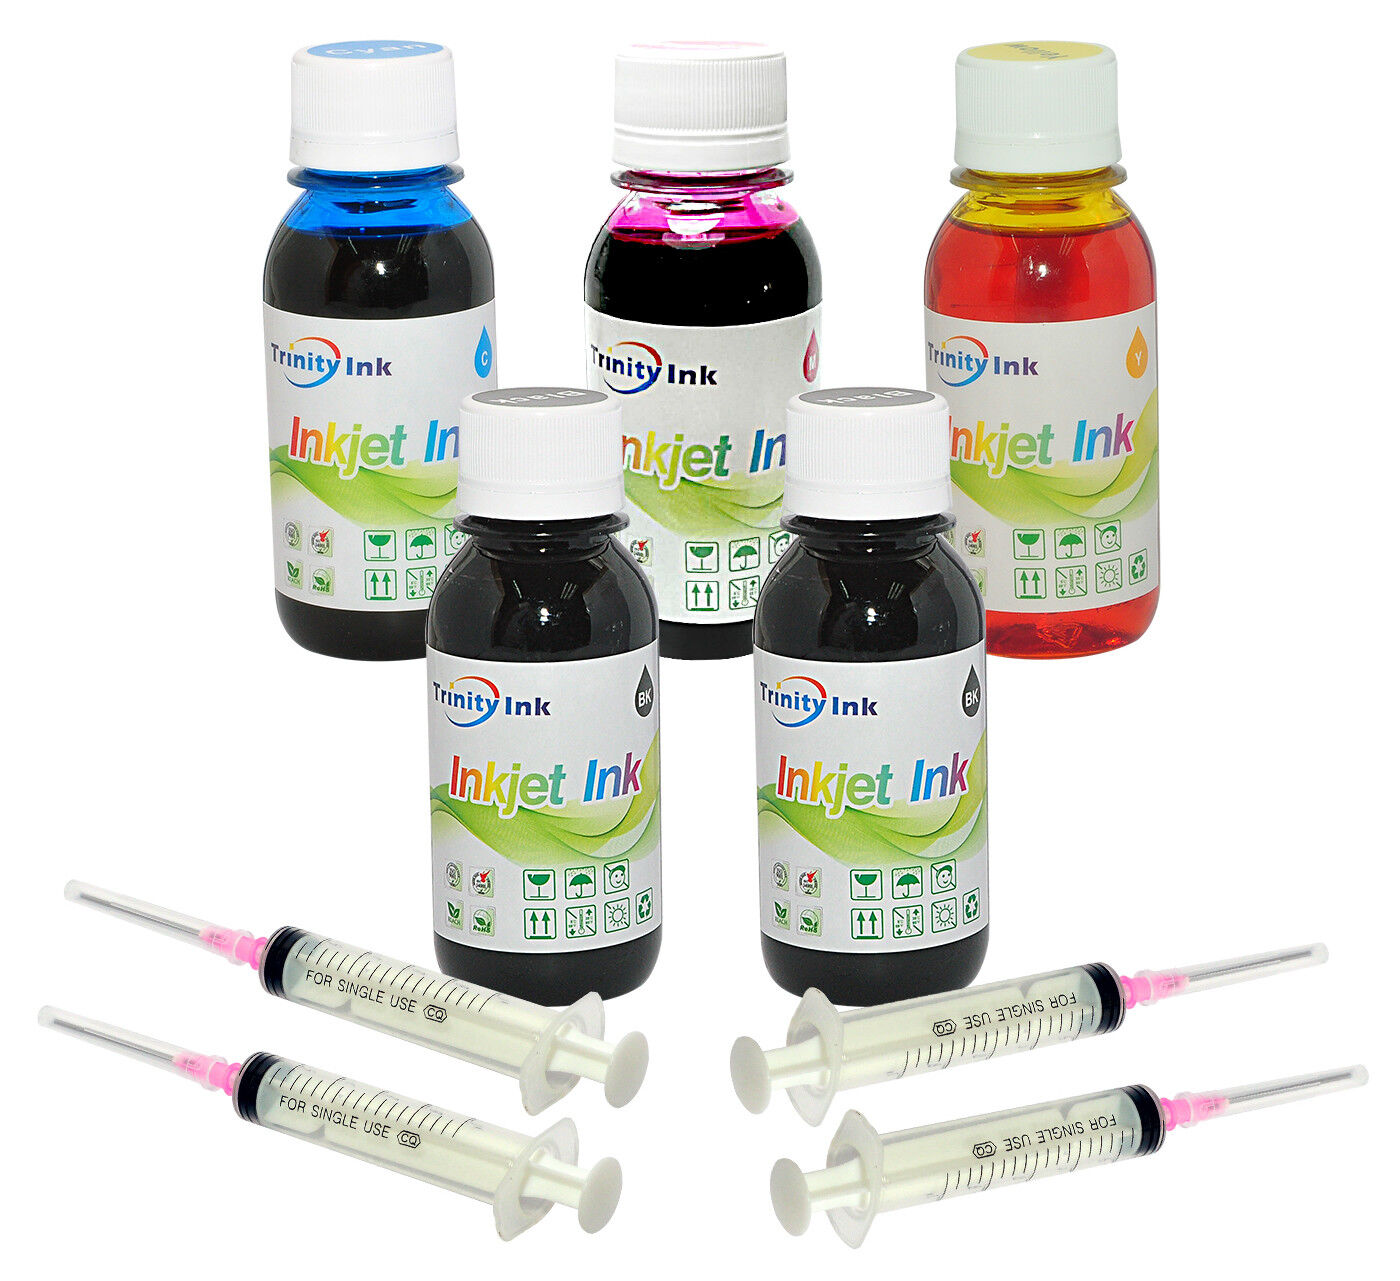 5x4oz Premium Bulk Refill ink kit for HP 564 564XL cartriges with instruction